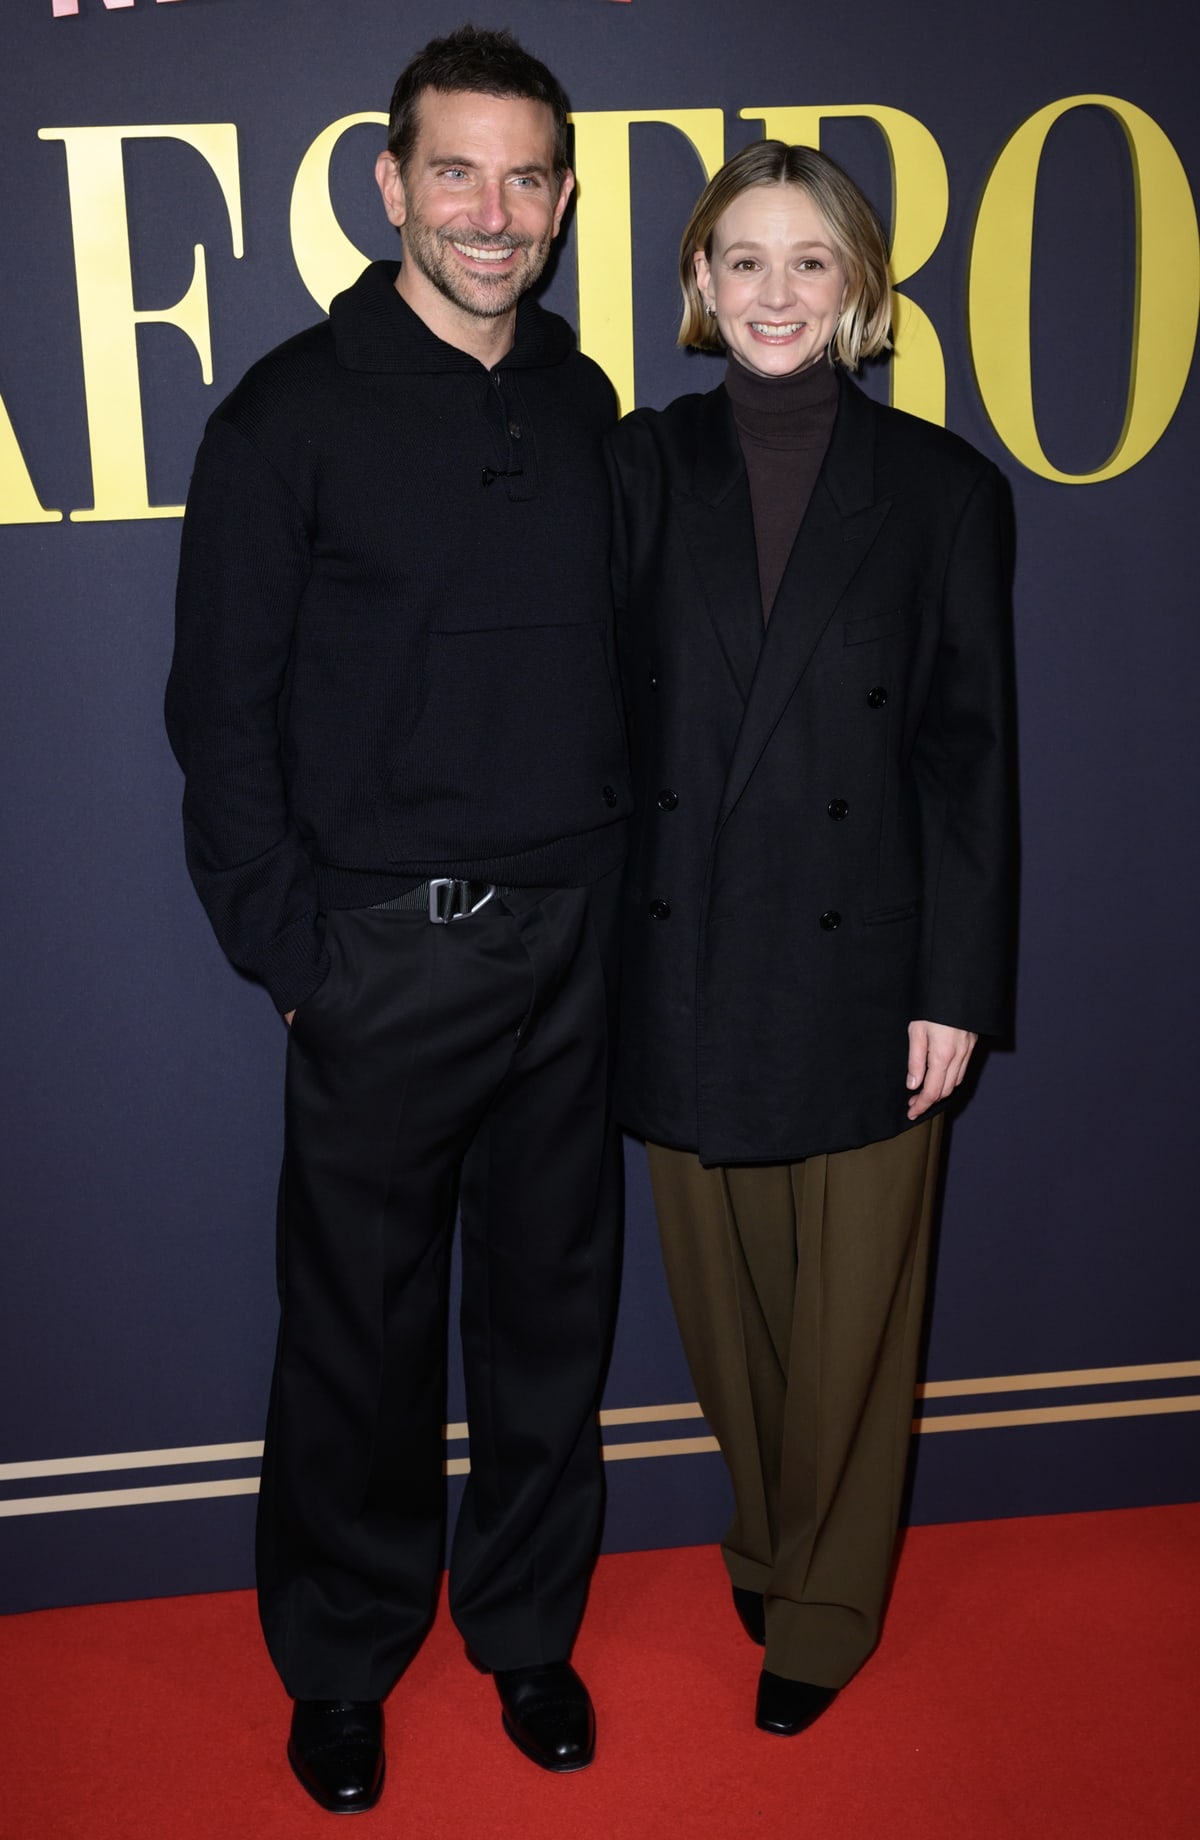 Bradley Cooper, with his notable height of 6 feet ½ inch (184.2 cm), and Carey Mulligan, standing at 5 feet 6 inches (167.6 cm), made a striking pair at the "Maestro" Special Screening held at Picturehouse Central on December 1, 2023, in London, England